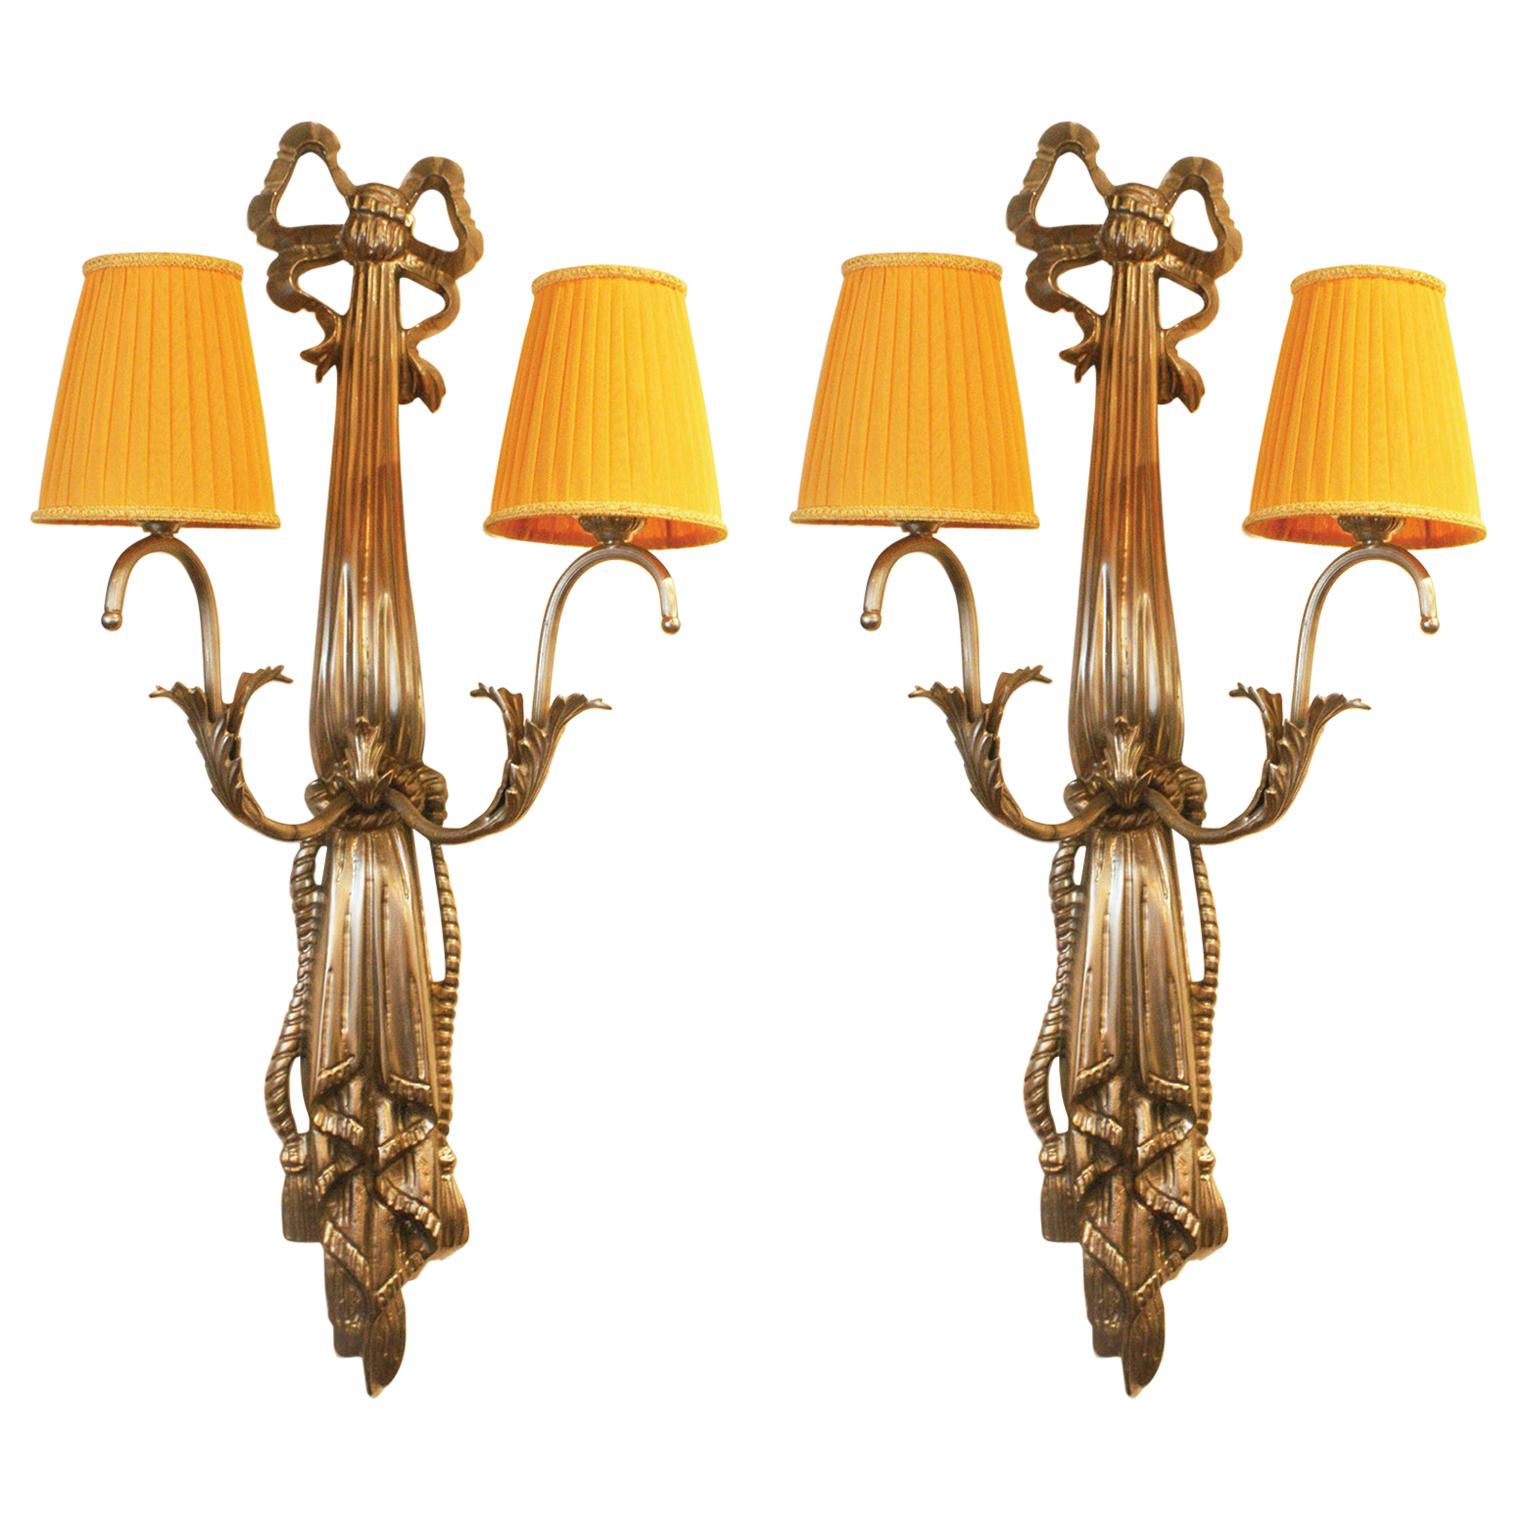 Impressive Pair of French Art Deco Wall Lights